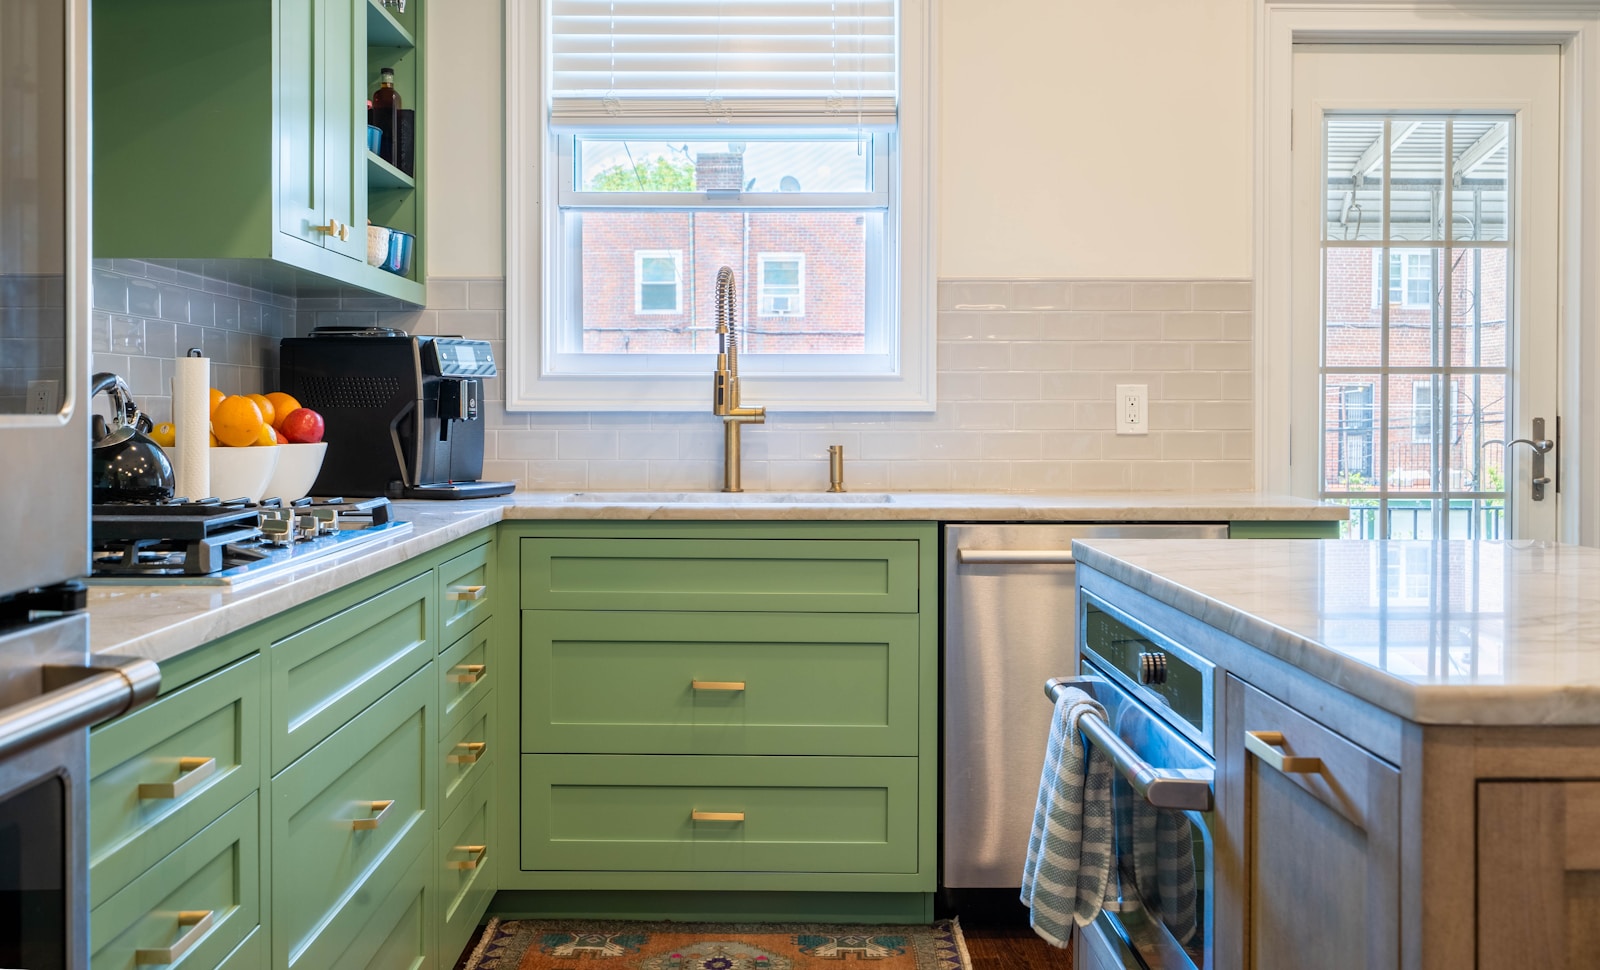 7 Simple Steps to Paint Perfect Kitchen Cabinets